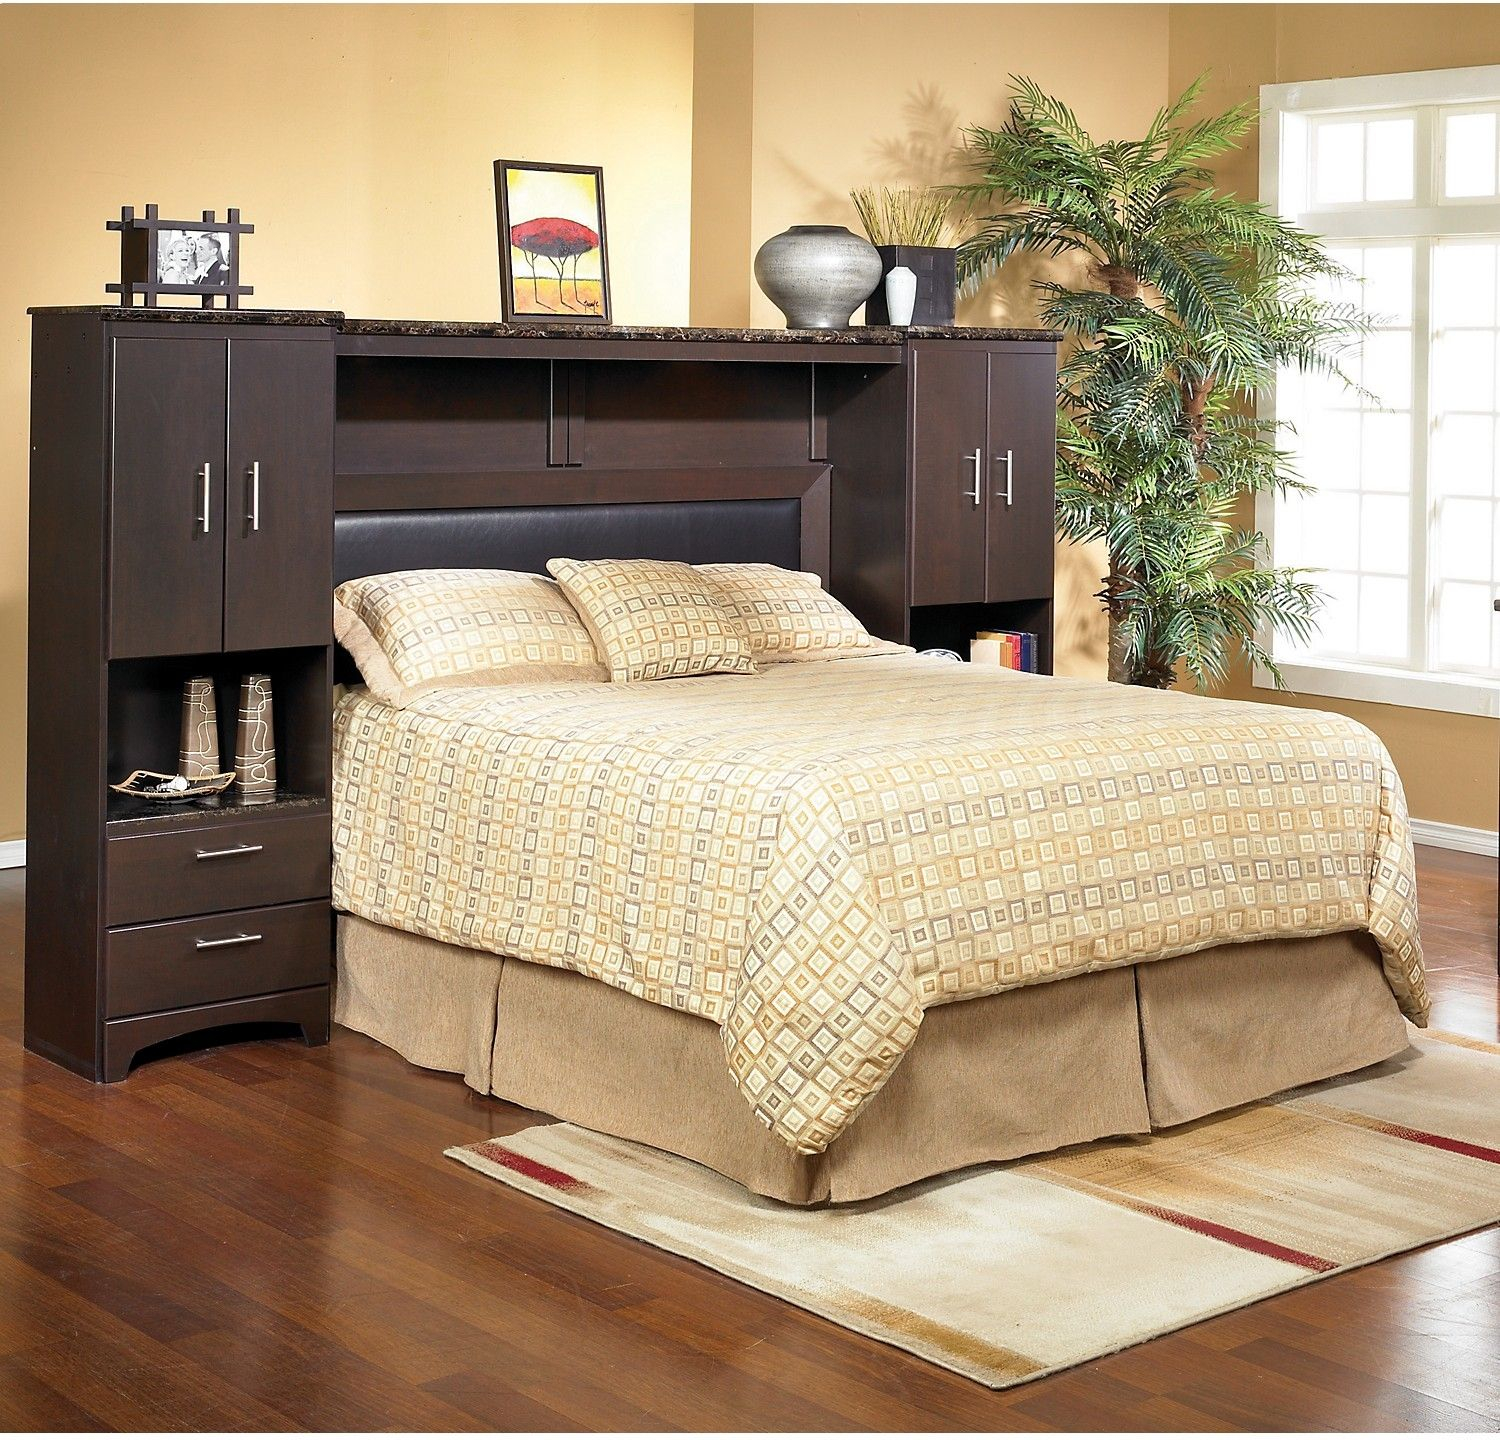 Oxford Queen Headboard Pier Wall Unit Bedroom Bedroom Wall Units pertaining to dimensions 1500 X 1440